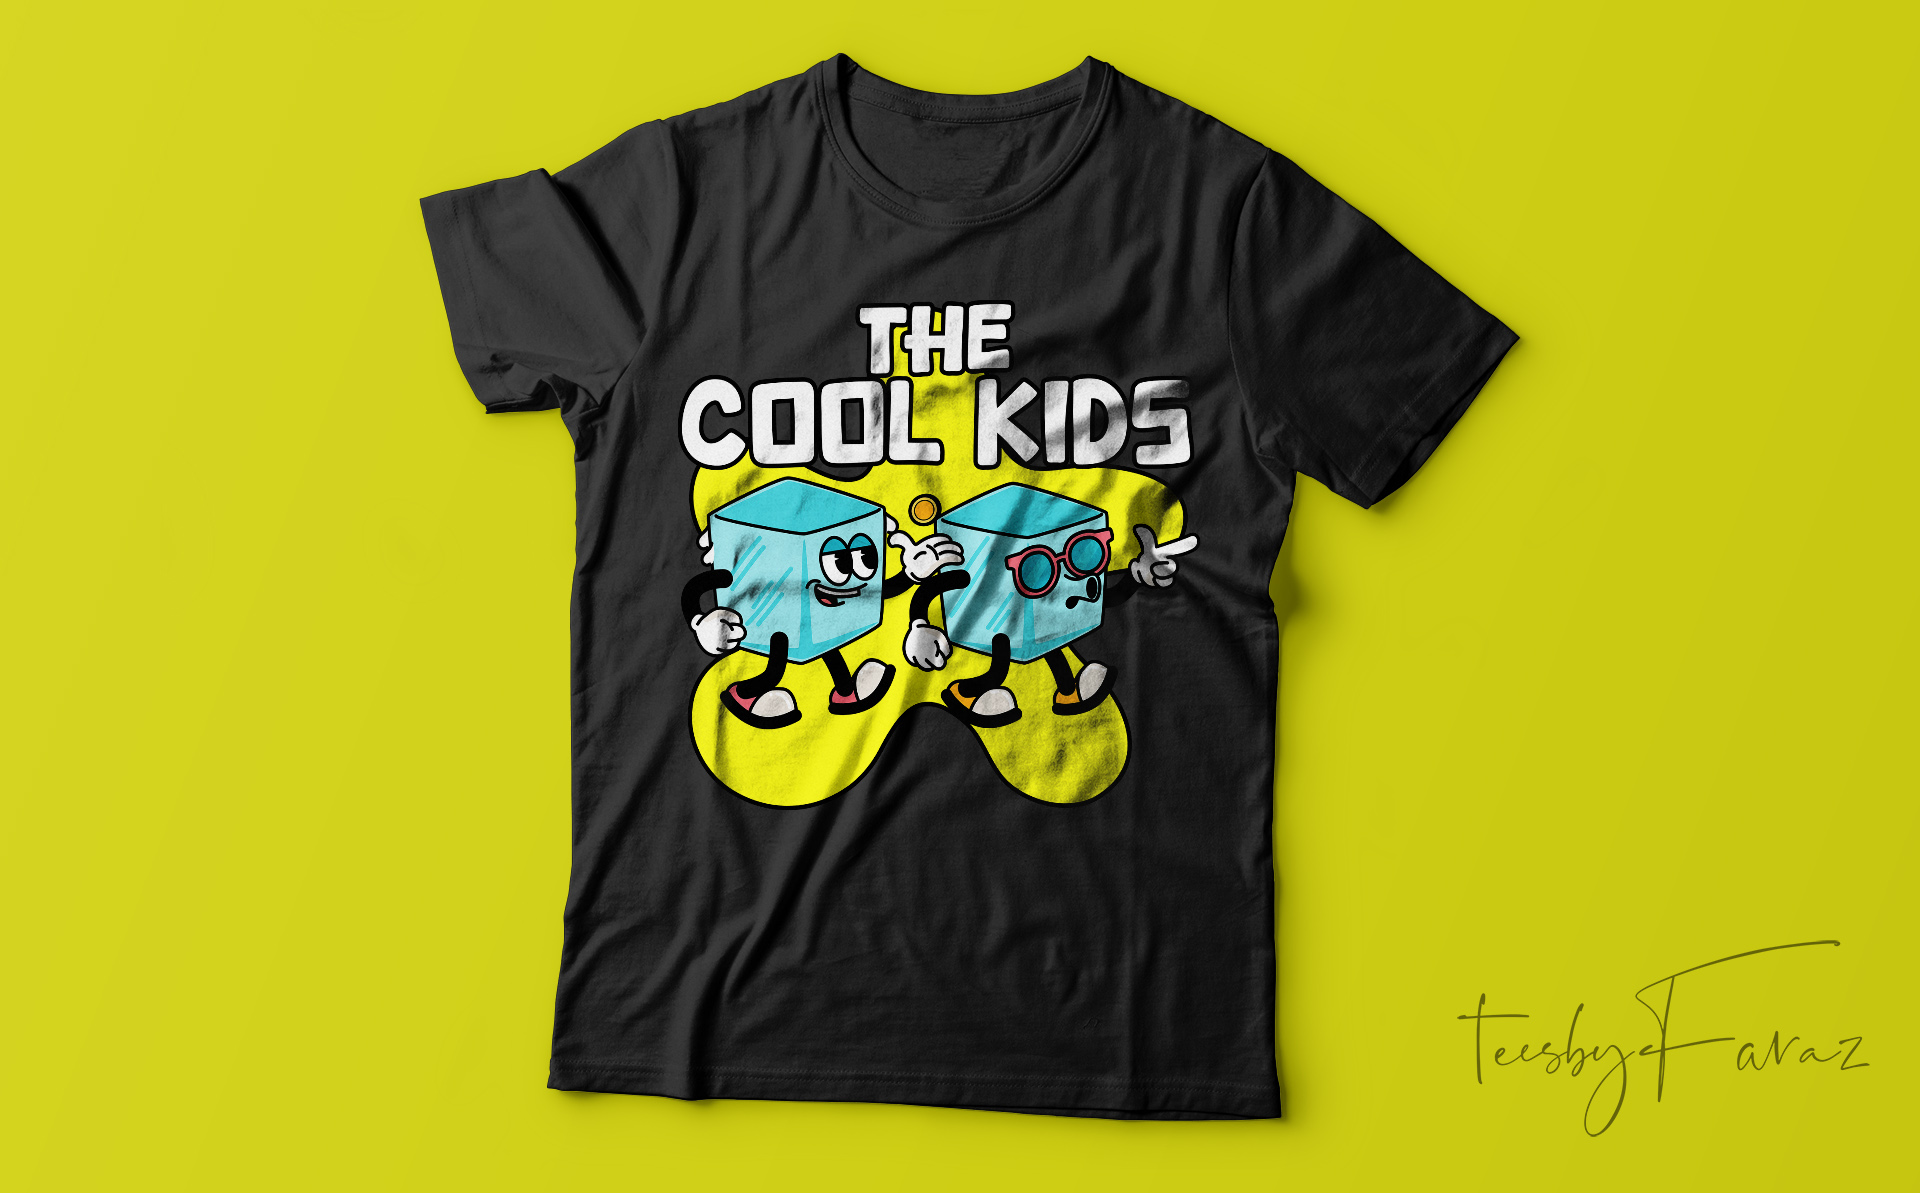 The Cool Kids| T-shirt design for sale - Buy t-shirt designs